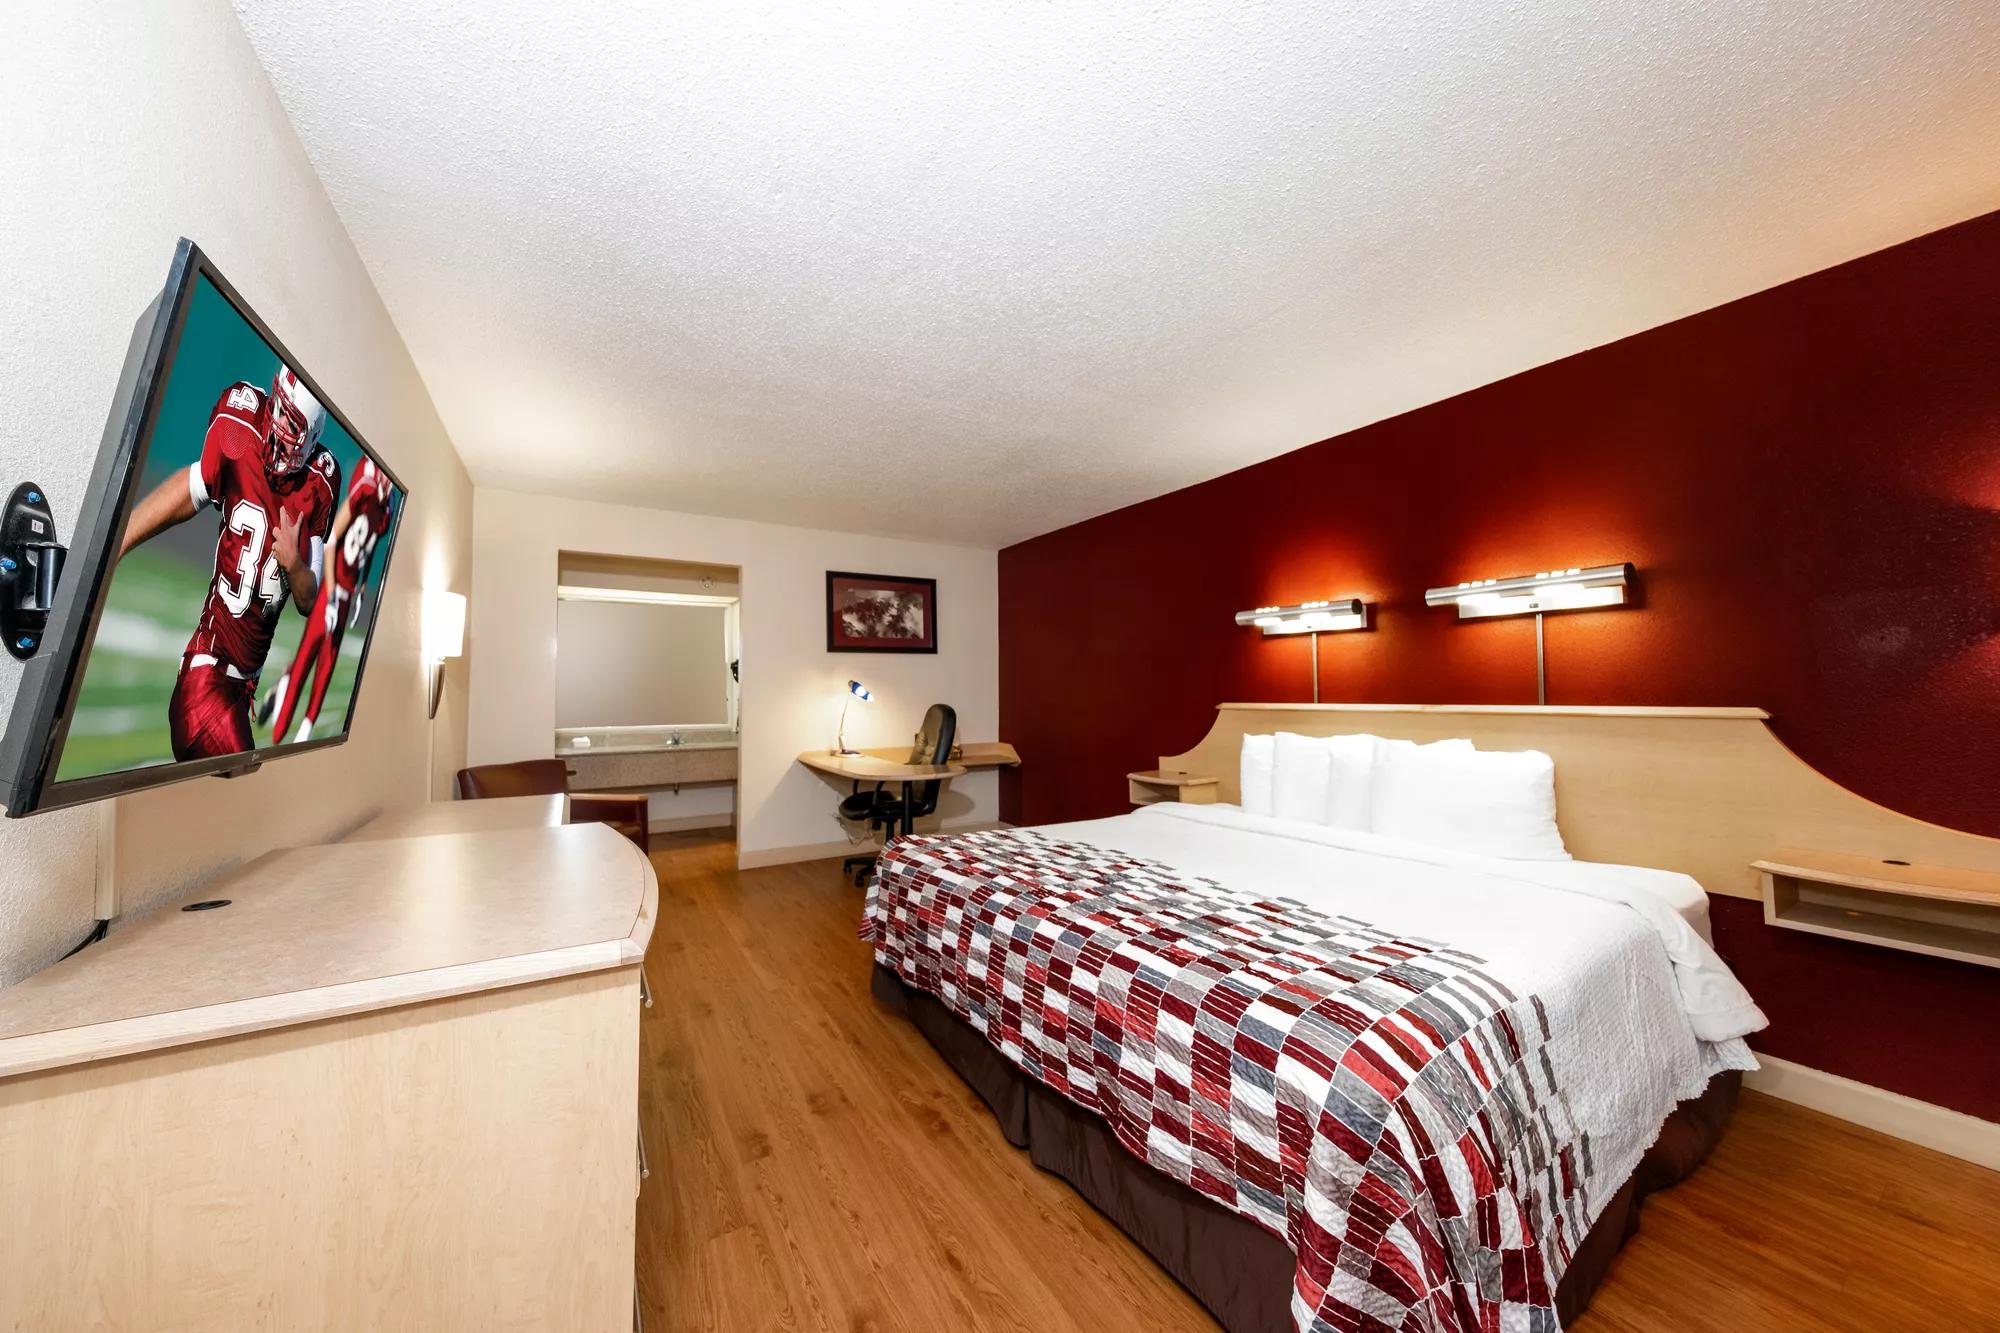 Red Roof Inn & Suites Wytheville Superior King Room Image